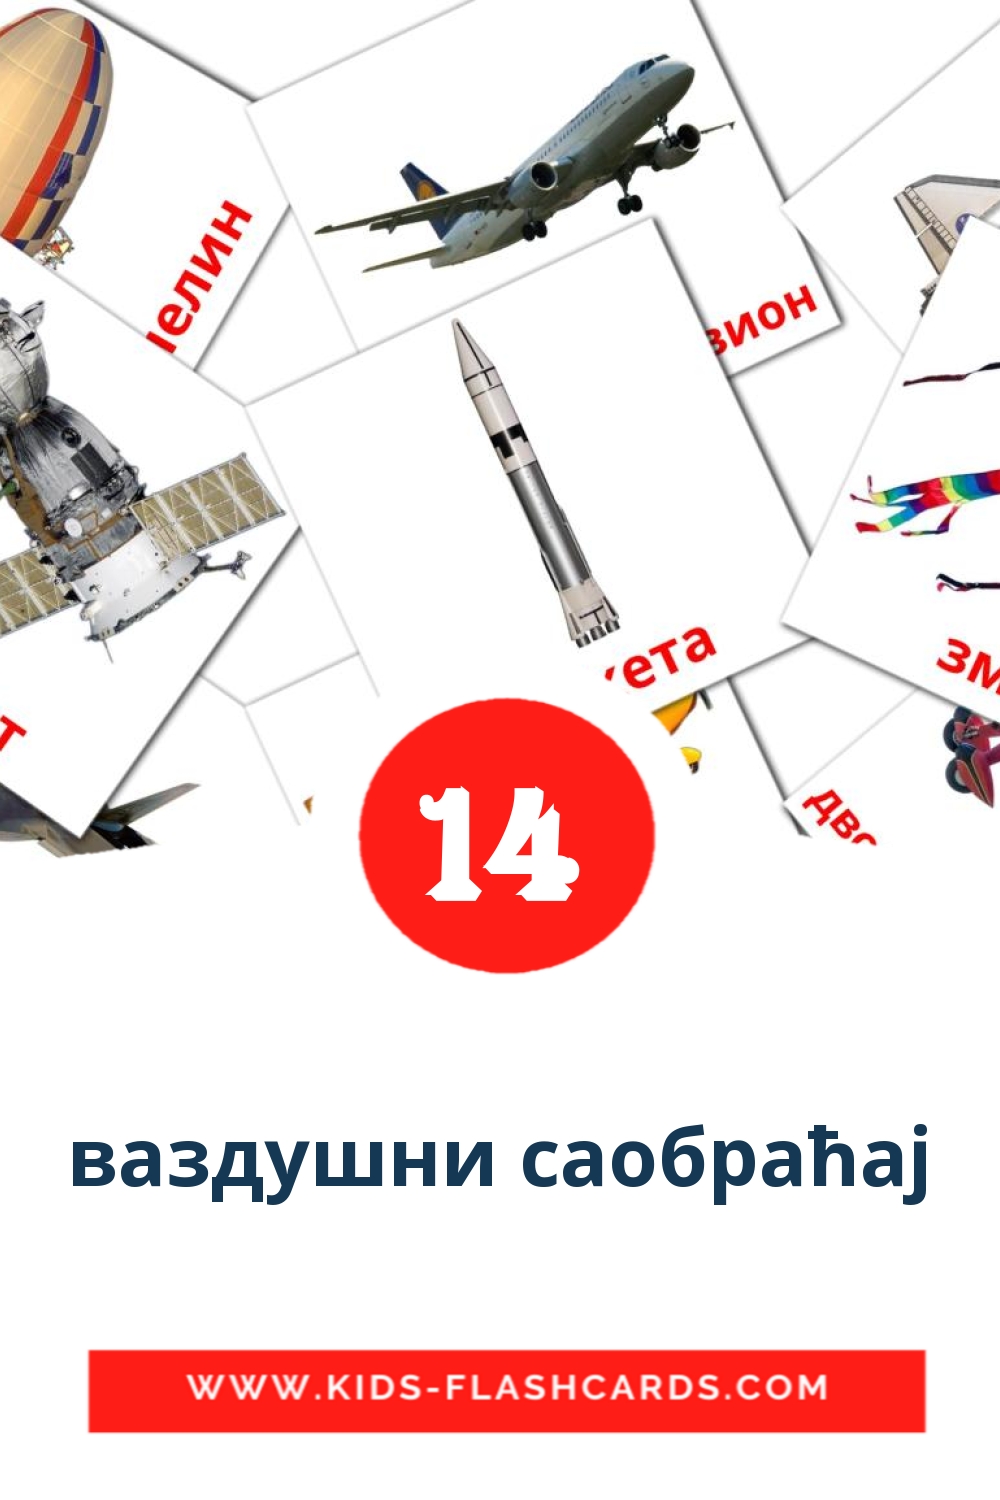 14 ваздушни саобраћај Picture Cards for Kindergarden in serbian(cyrillic)